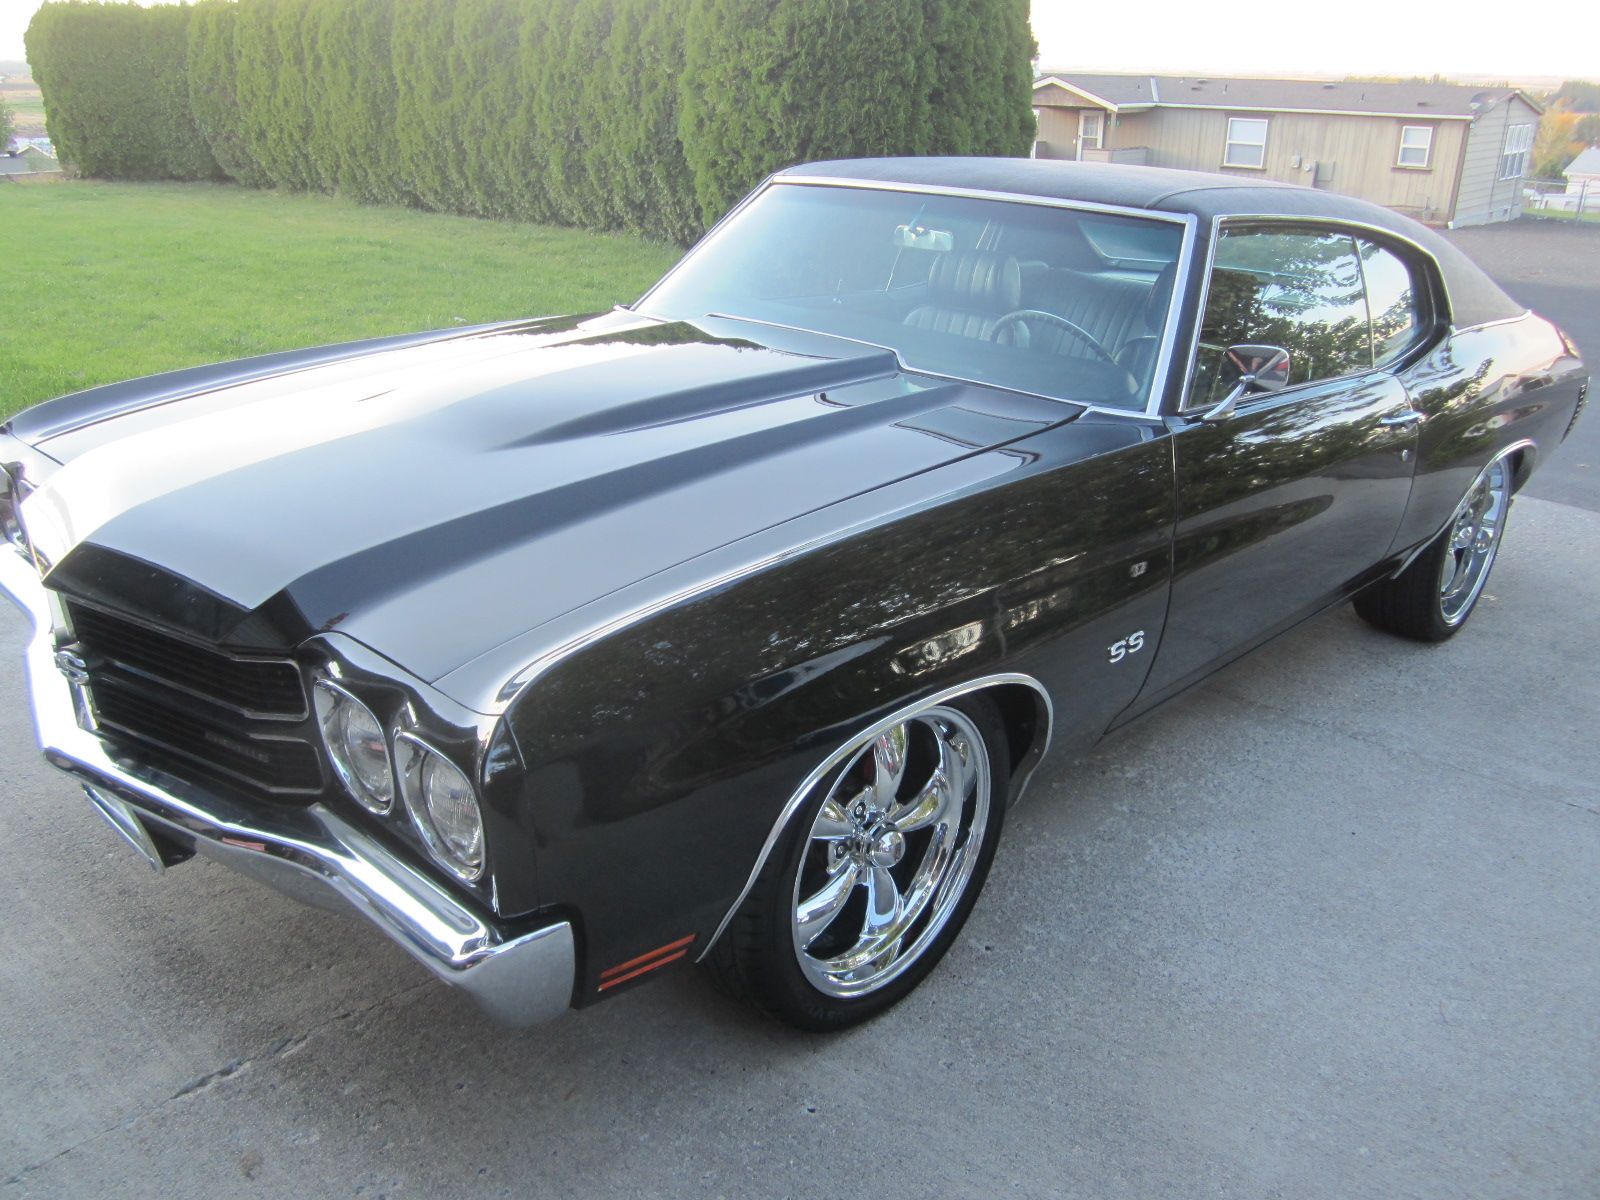 Mike Treadwell - 1970 Chevrolet Chevelle